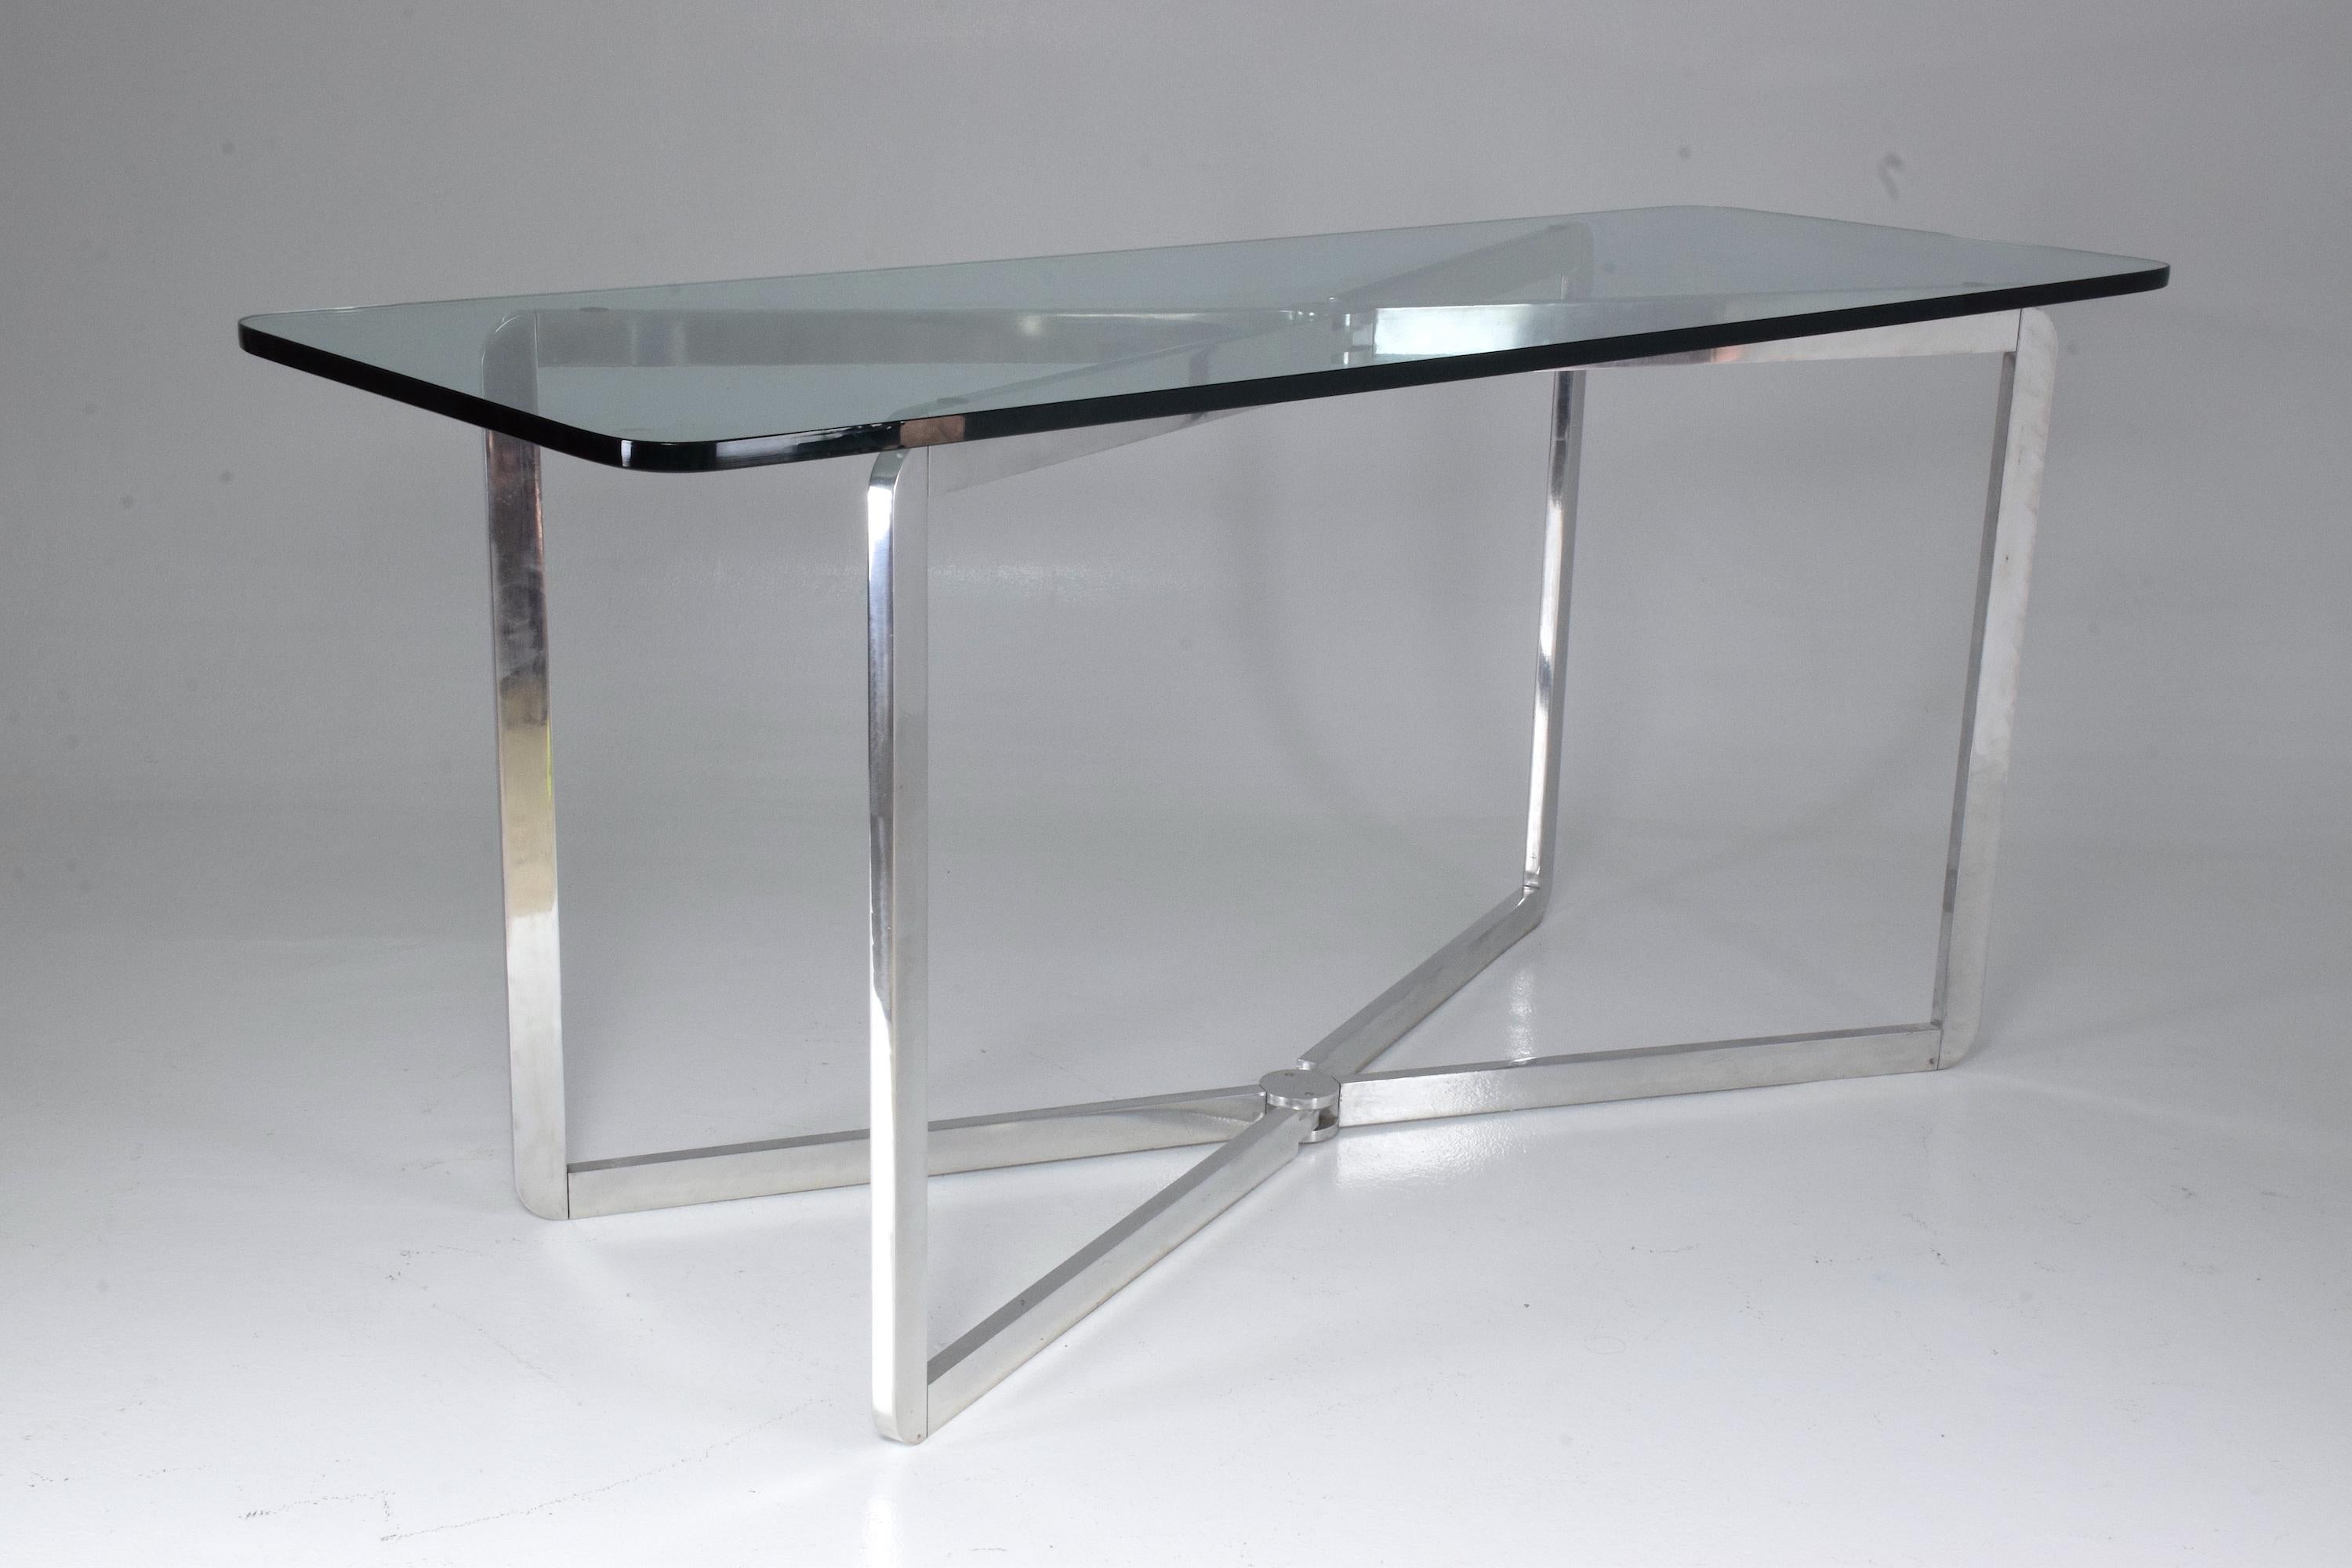 A 20th century vintage foldable console table designed by iconic French designer and architect Michel Boyer for Rouve, circa 1970s. Composed of an adjustable aluminium folding structure and has been restored with a new thick clear glass top